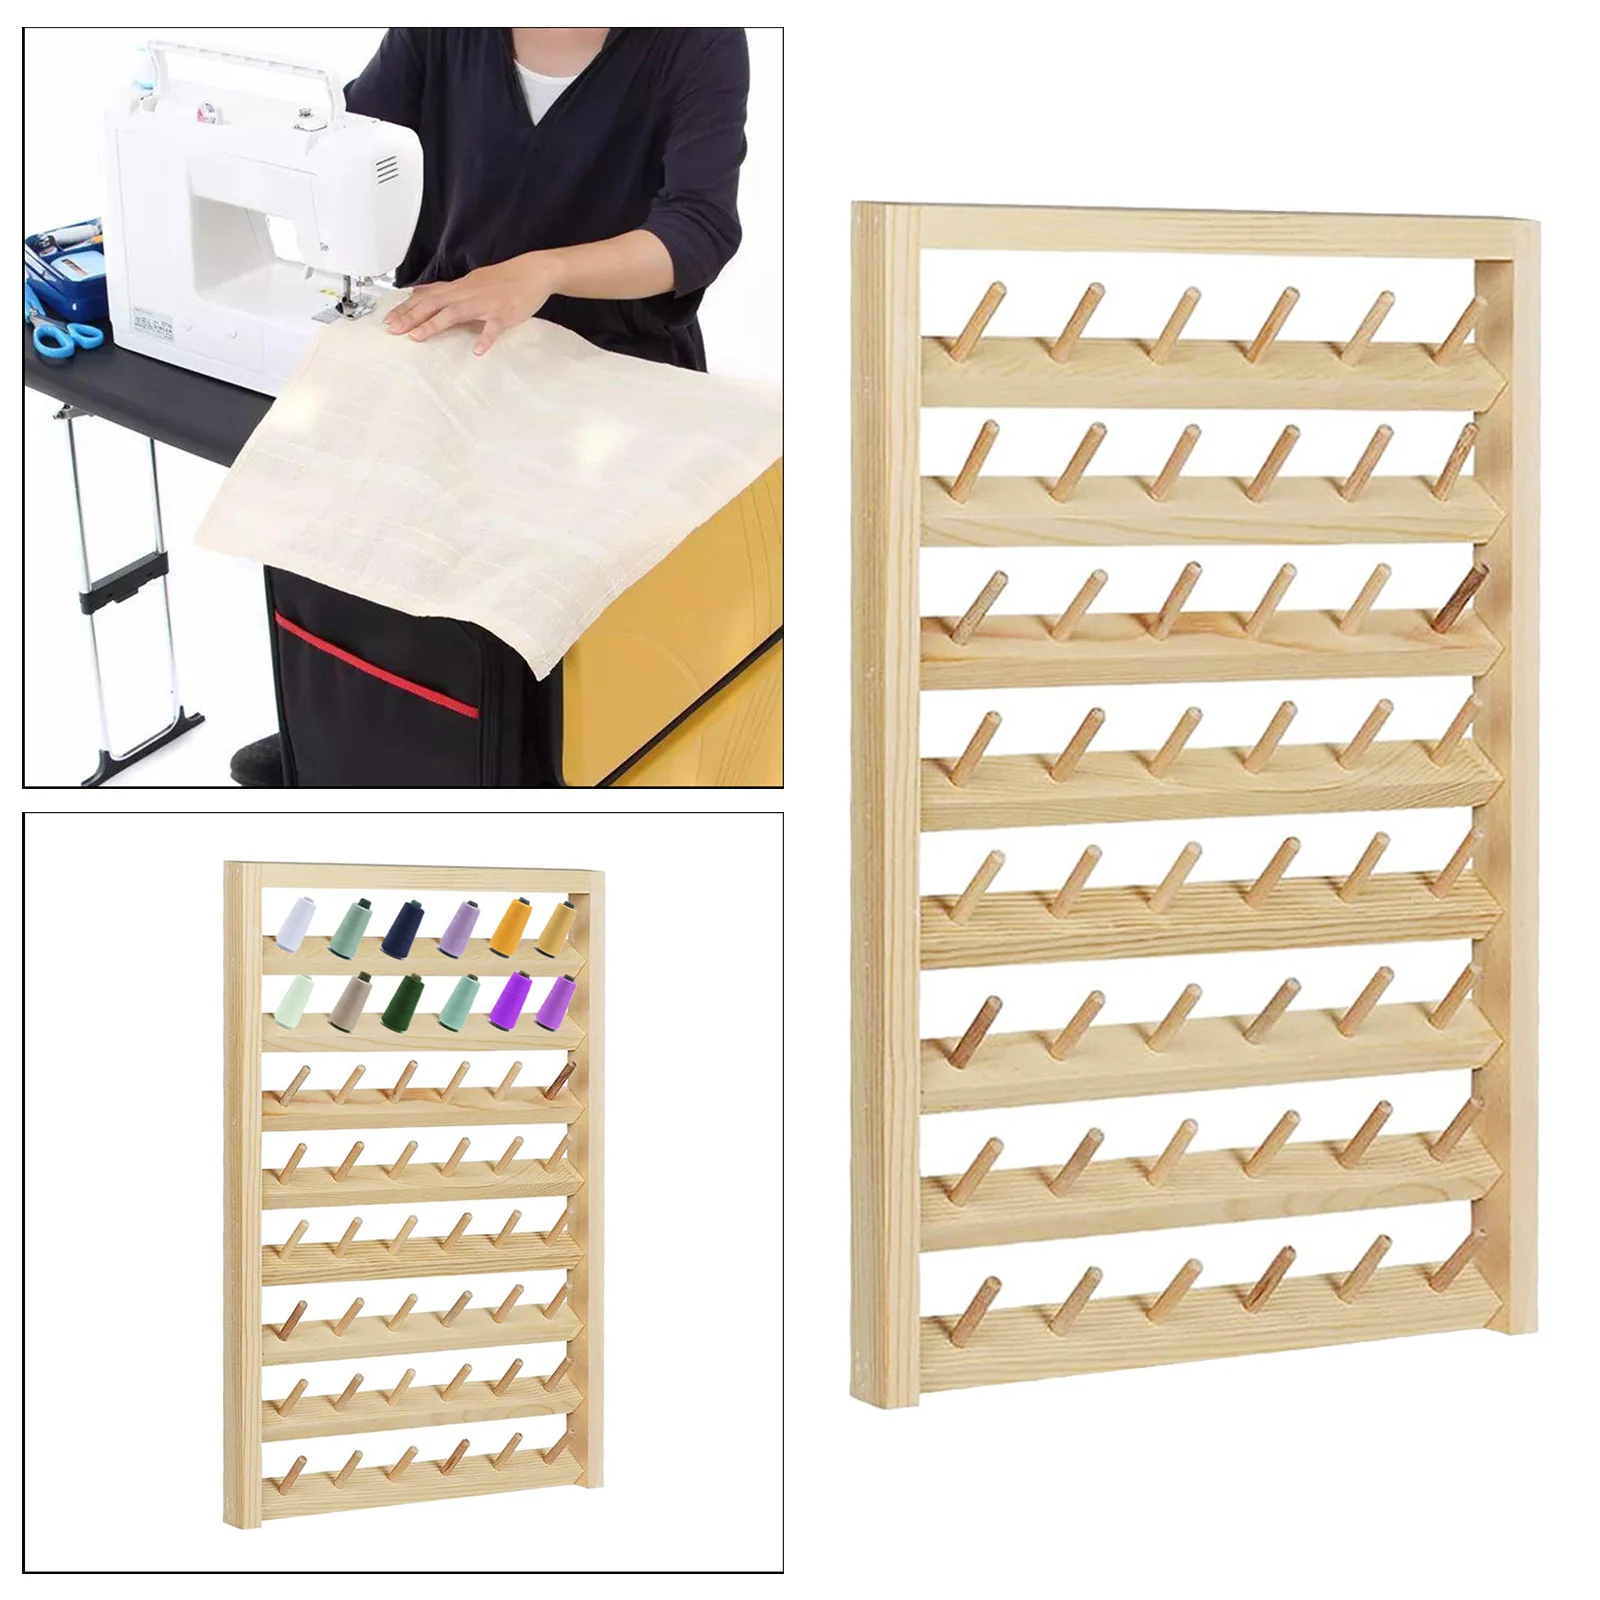 63-Spool Thread Rack, Wooden Thread Holder Sewing Organizer for Sewing,  Quilting, Embroidery, Hair-braiding - AliExpress